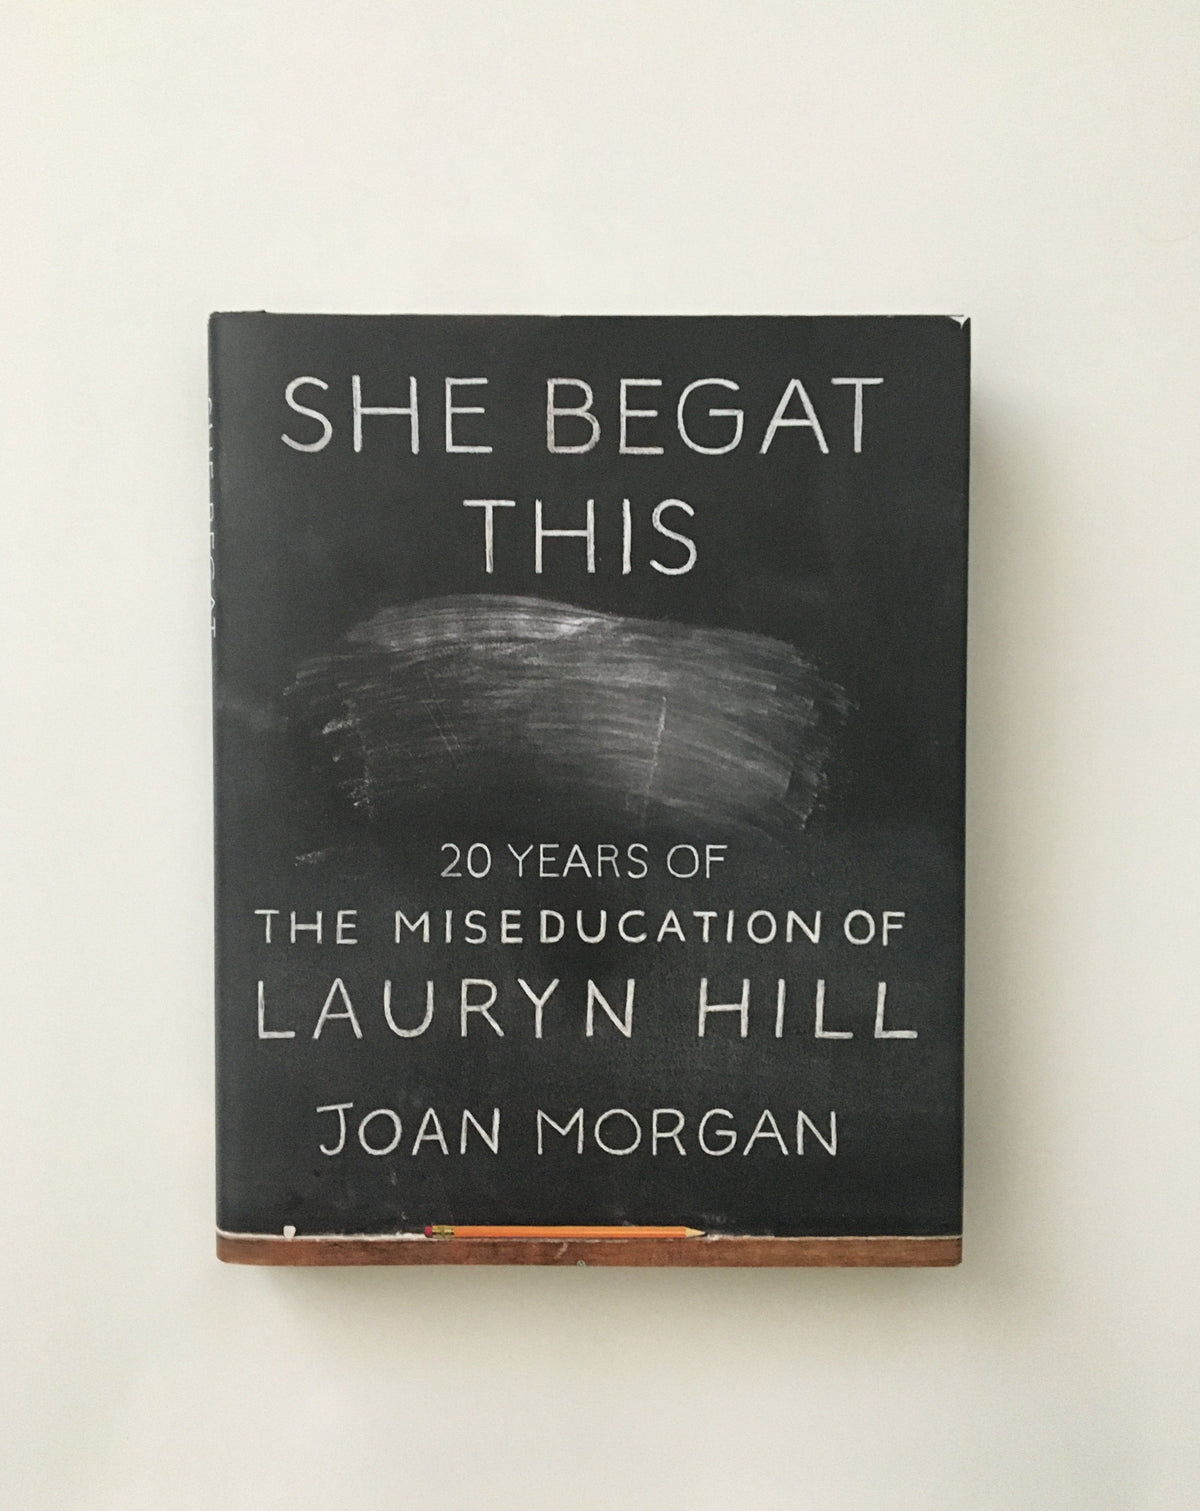 She Begat This: 20 Years of The Miseducation of Lauryn Hill by Joan Morgan, book, Ten Dollar Books, Ten Dollar Books